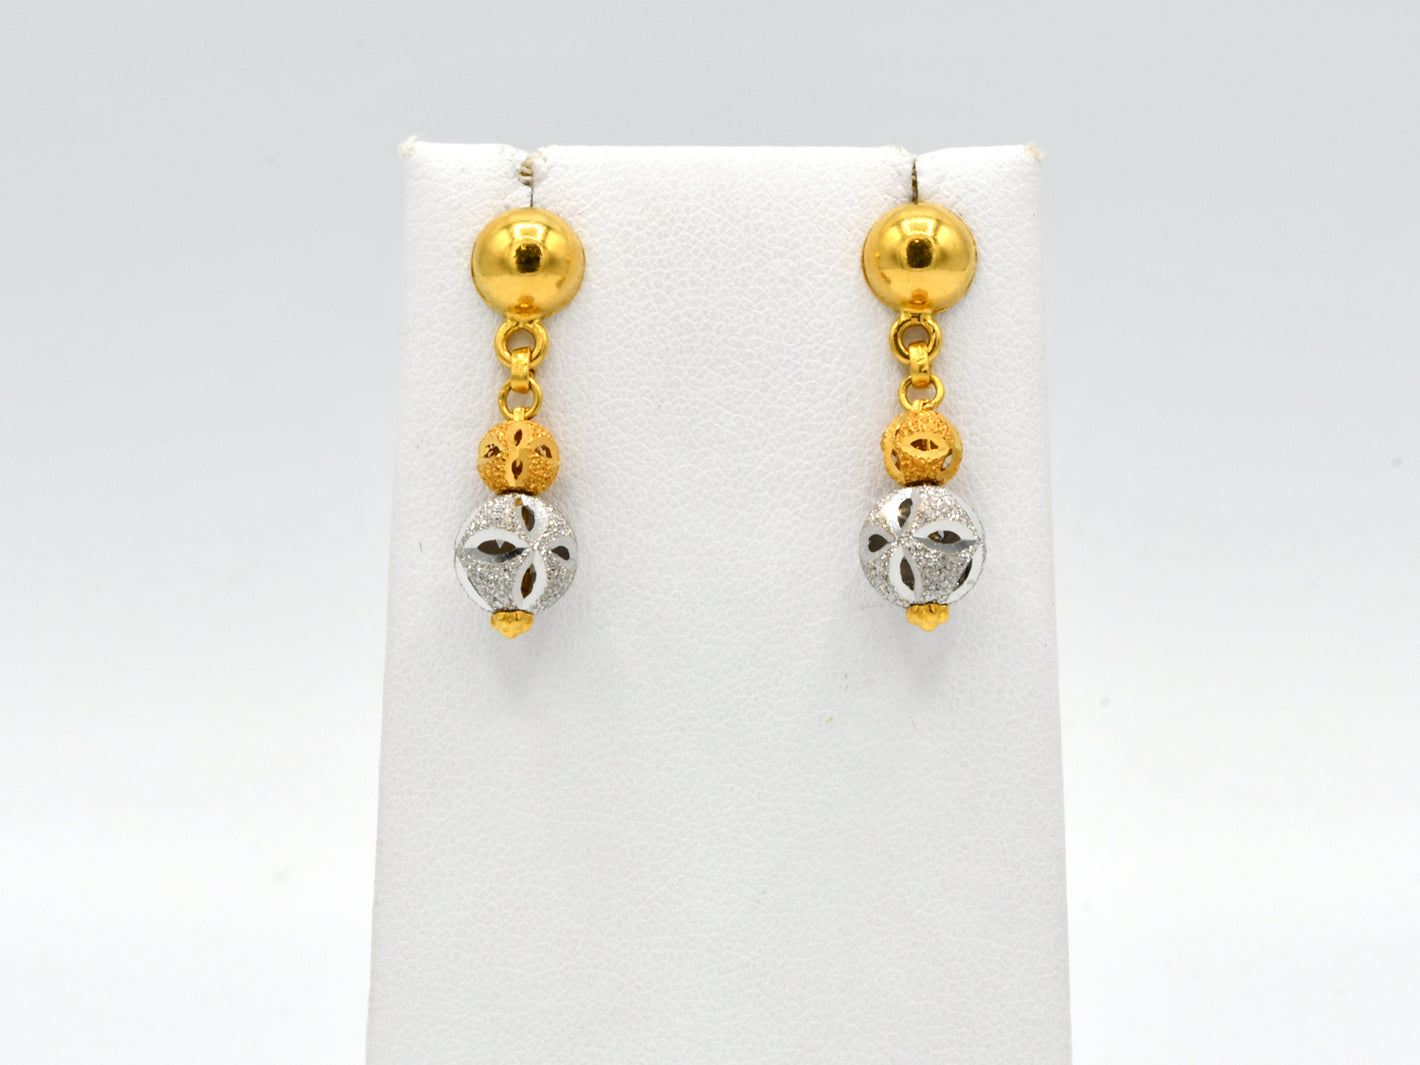 22ct Gold Two Tone Earrings With Hanging - Roop Darshan